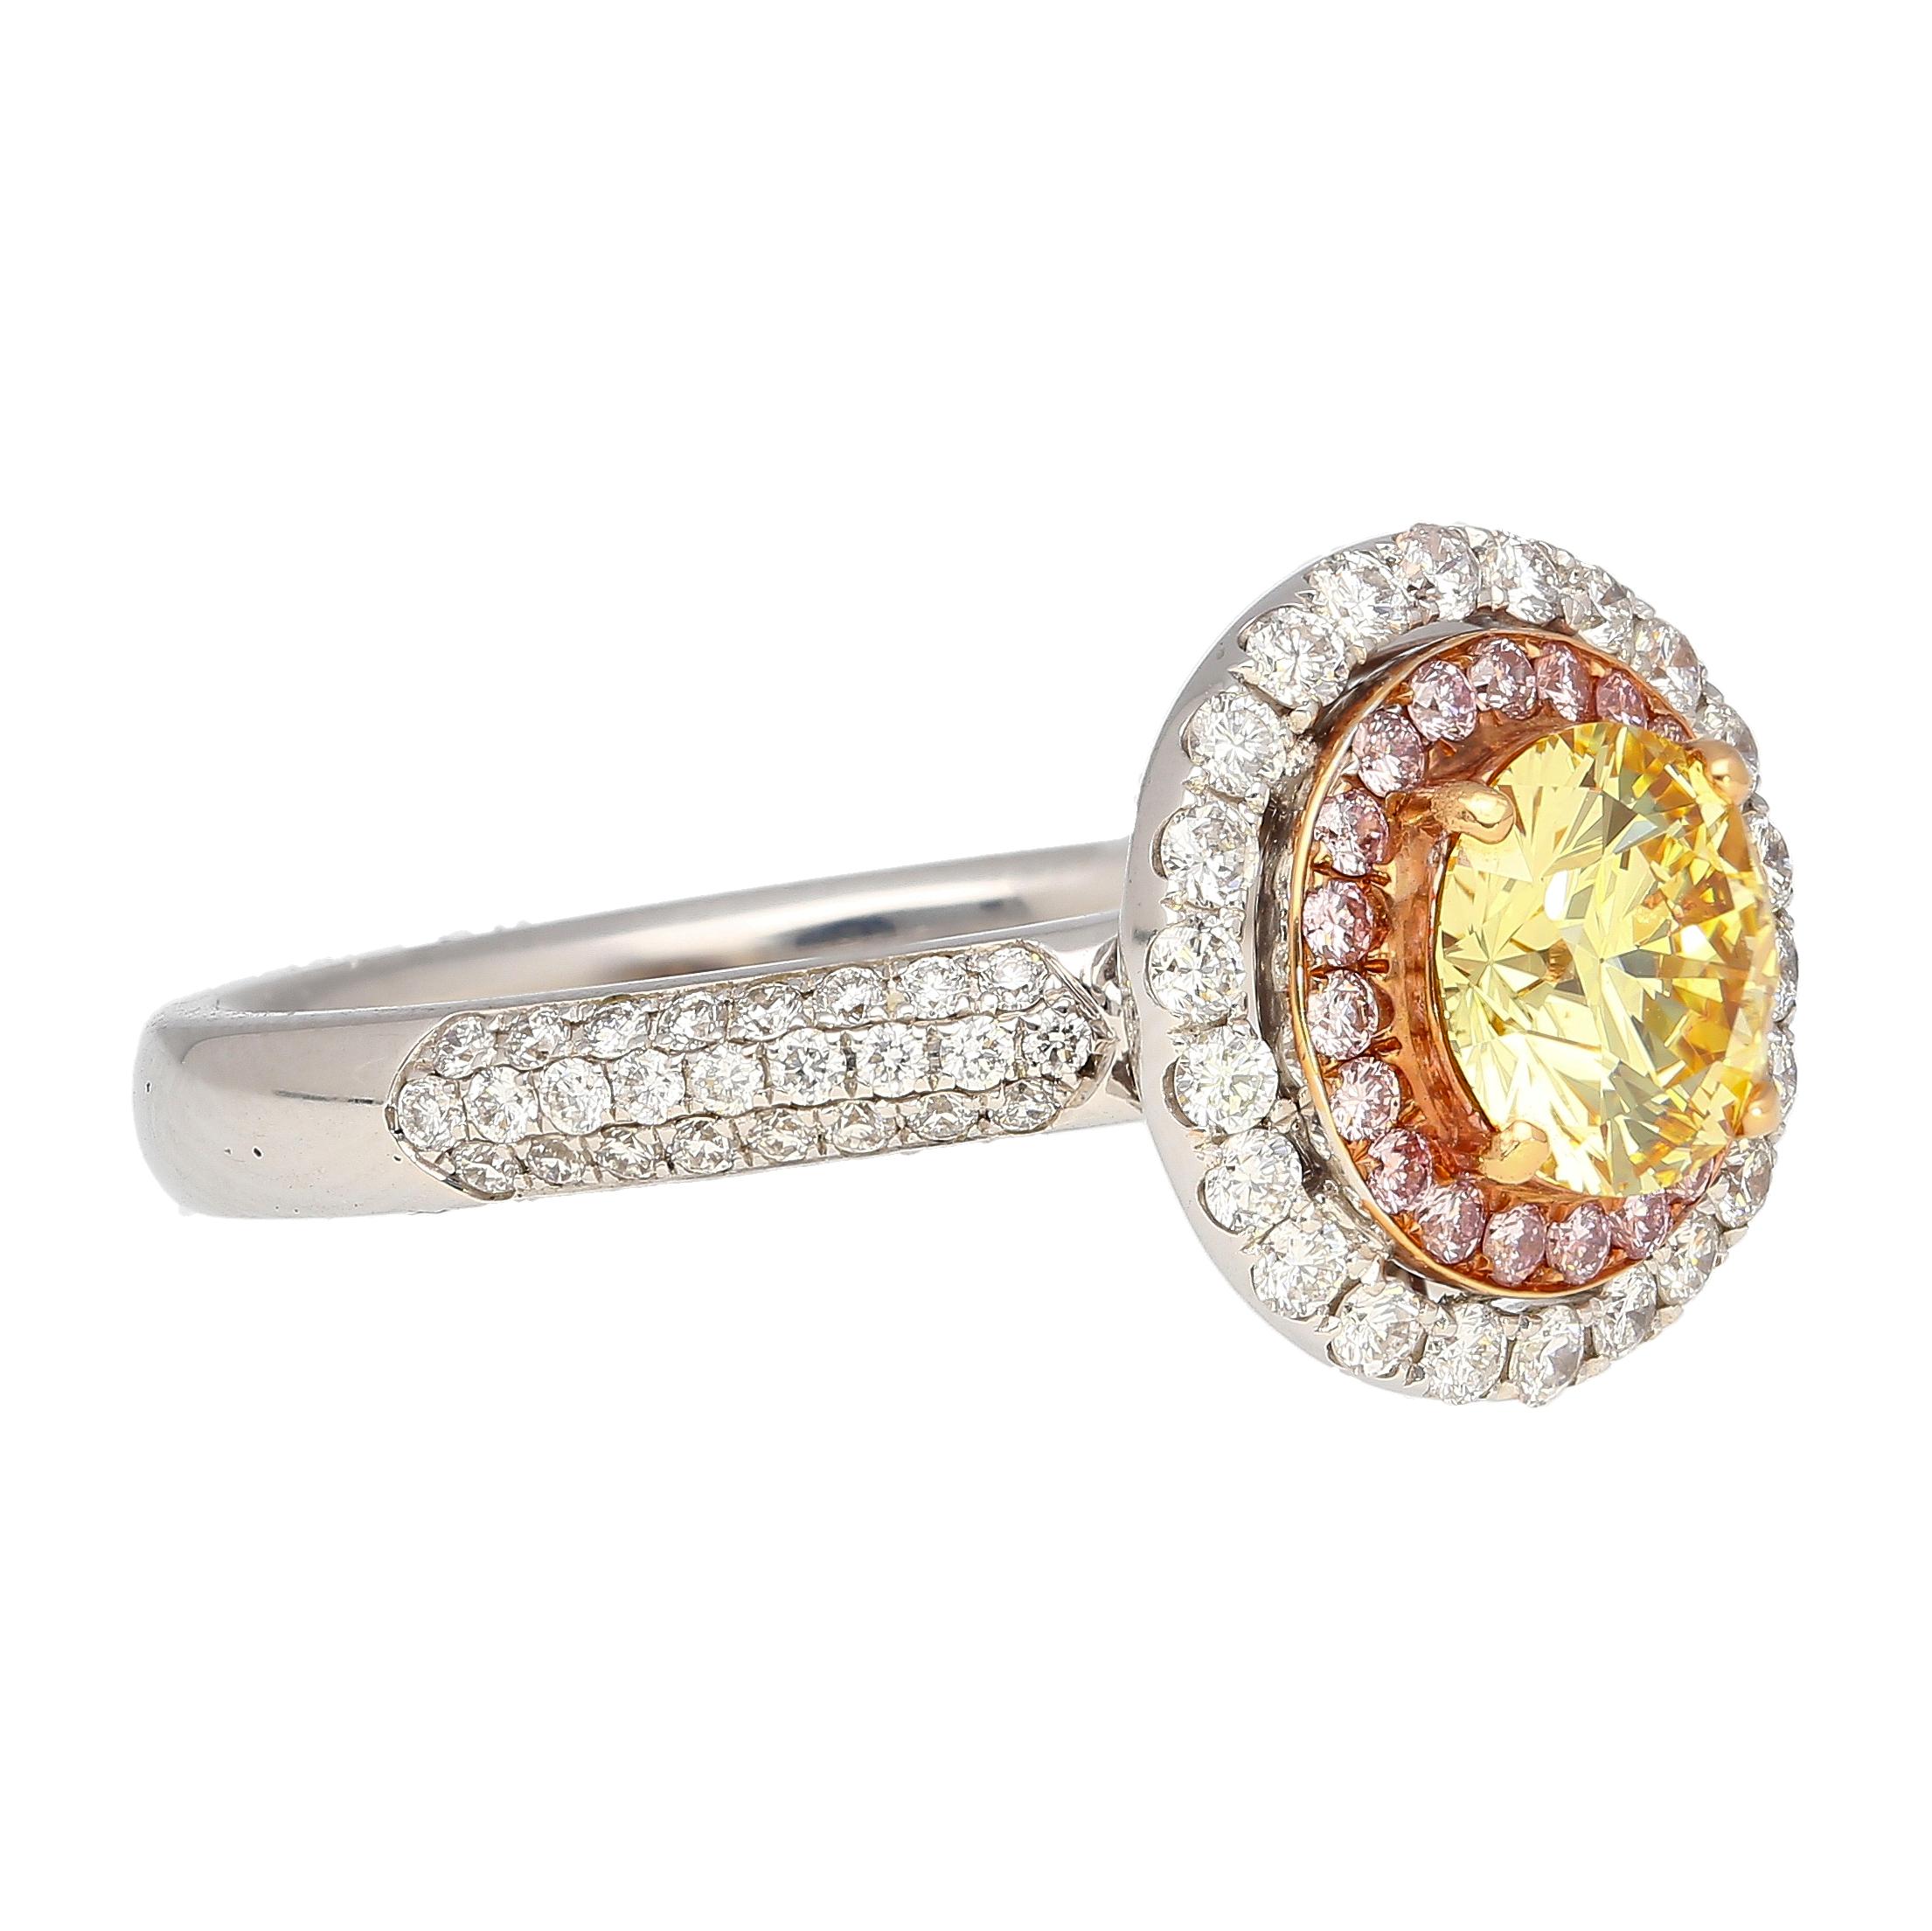 GIA Cert 1.01 Carat Round Cut Fancy Yellow Diamond Ring in 18KW Multi Stone Halo In New Condition For Sale In Miami, FL